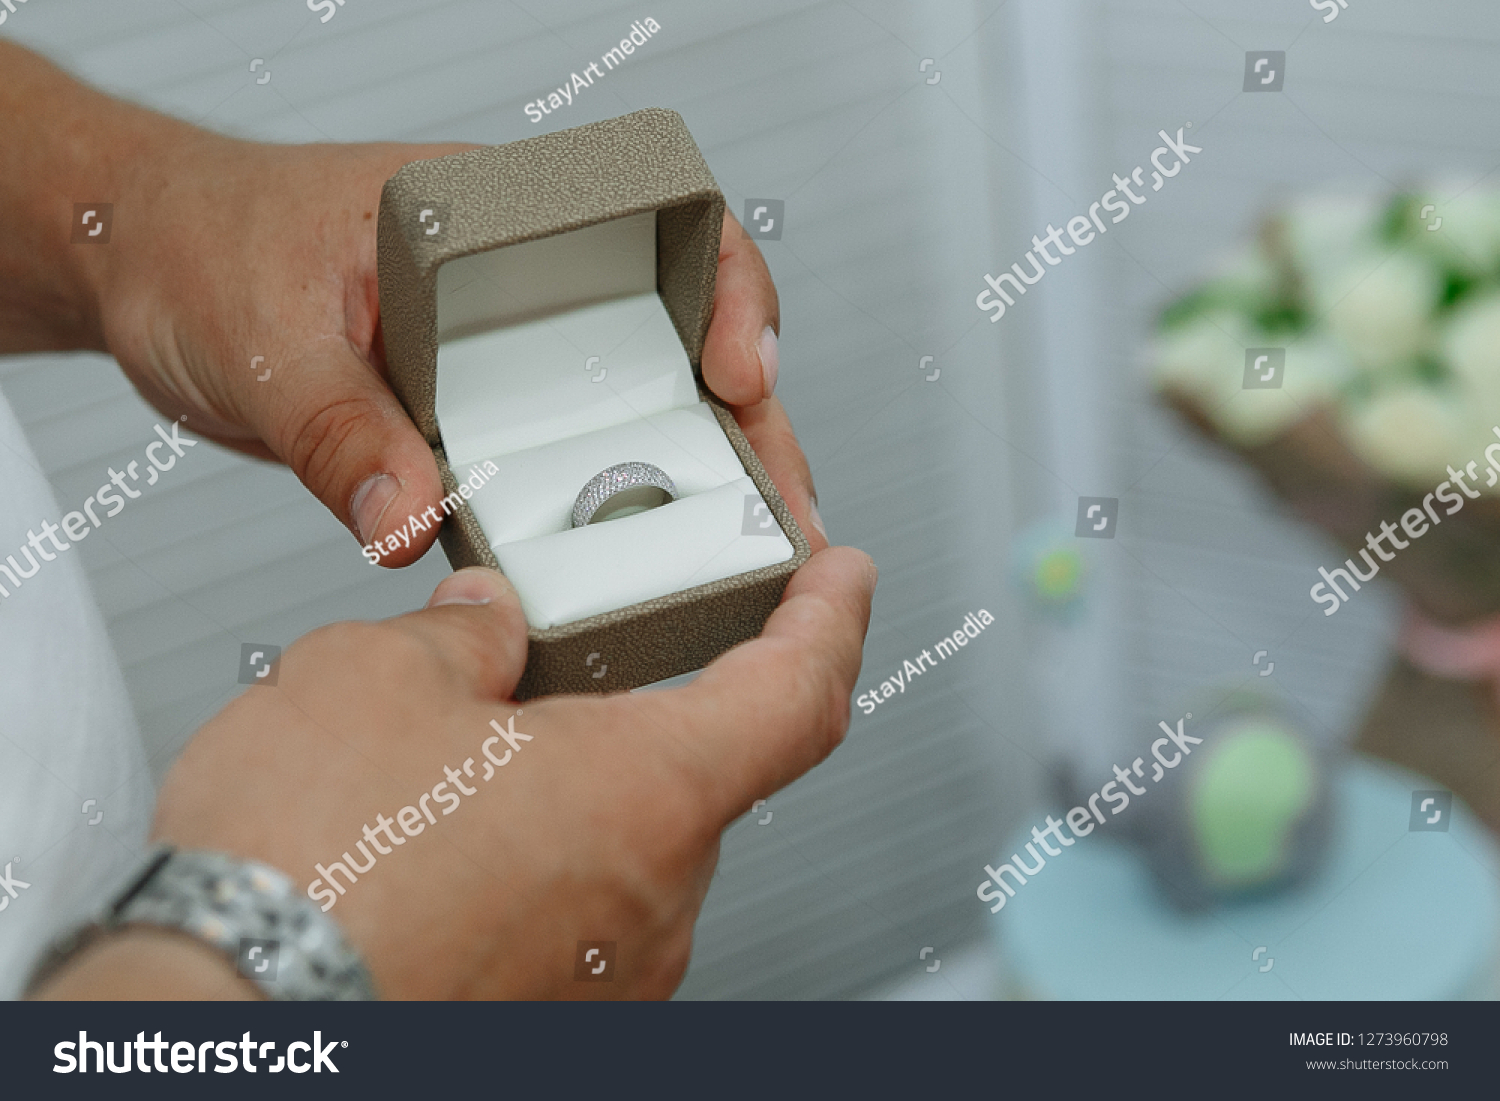 Diamond ring in the hands of a man. On the background of flowers #1273960798